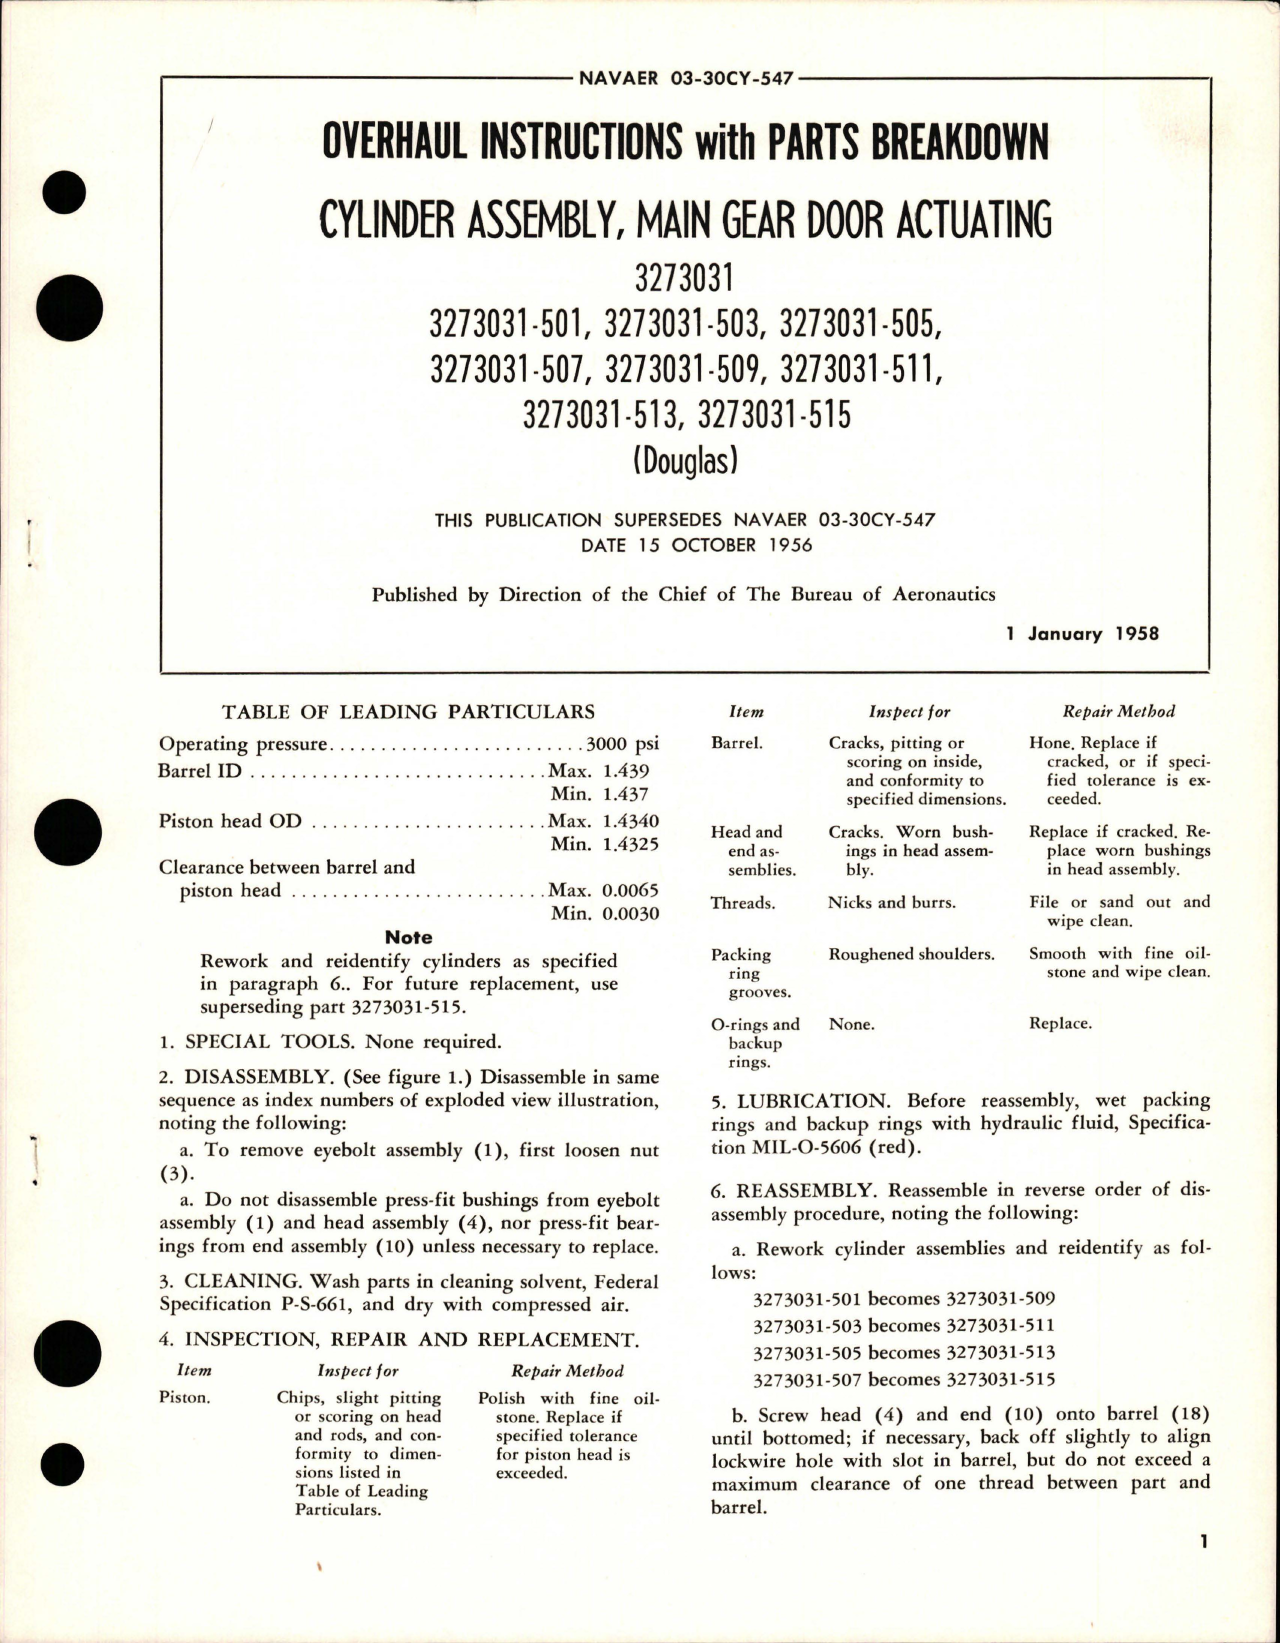 Sample page 1 from AirCorps Library document: Overhaul Instructions with Parts for Main Gear Door Actuating Cylinder Assembly